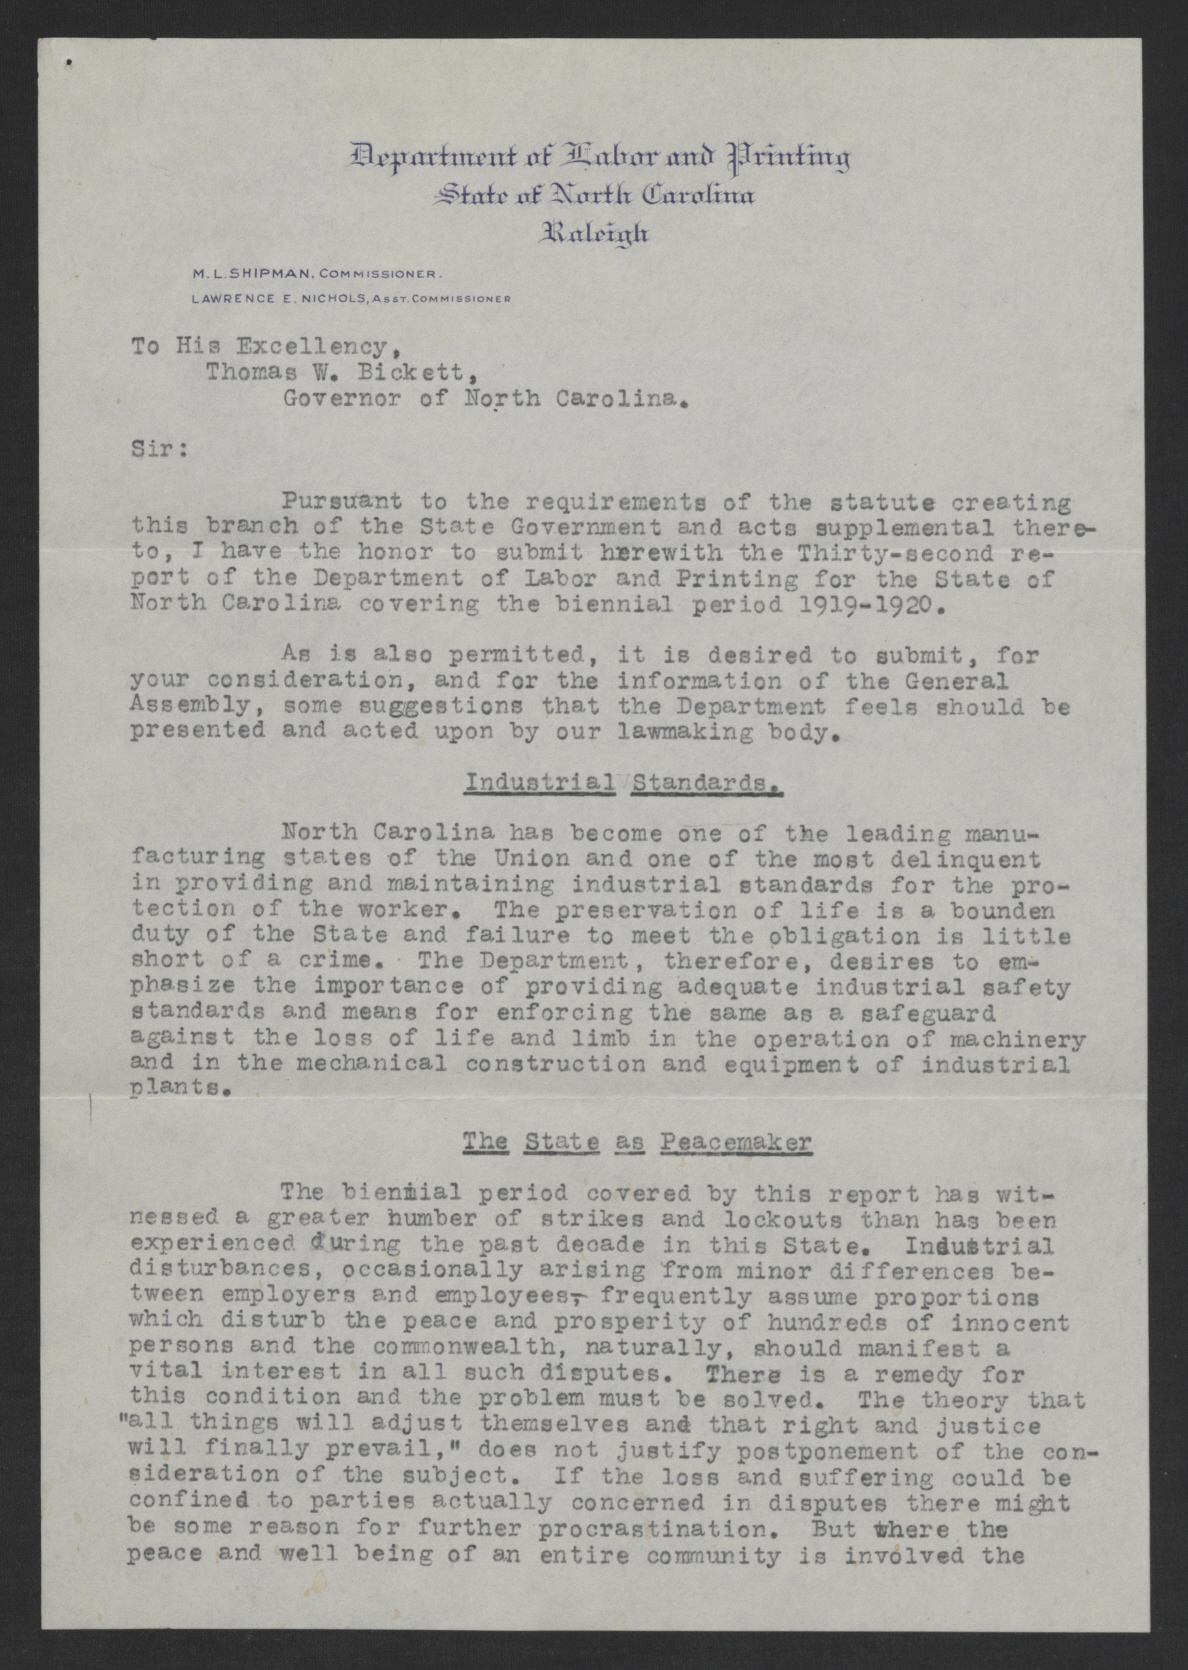 Letter from Mitchell L. Shipman to Thomas W. Bickett, December 15, 1920, page 1